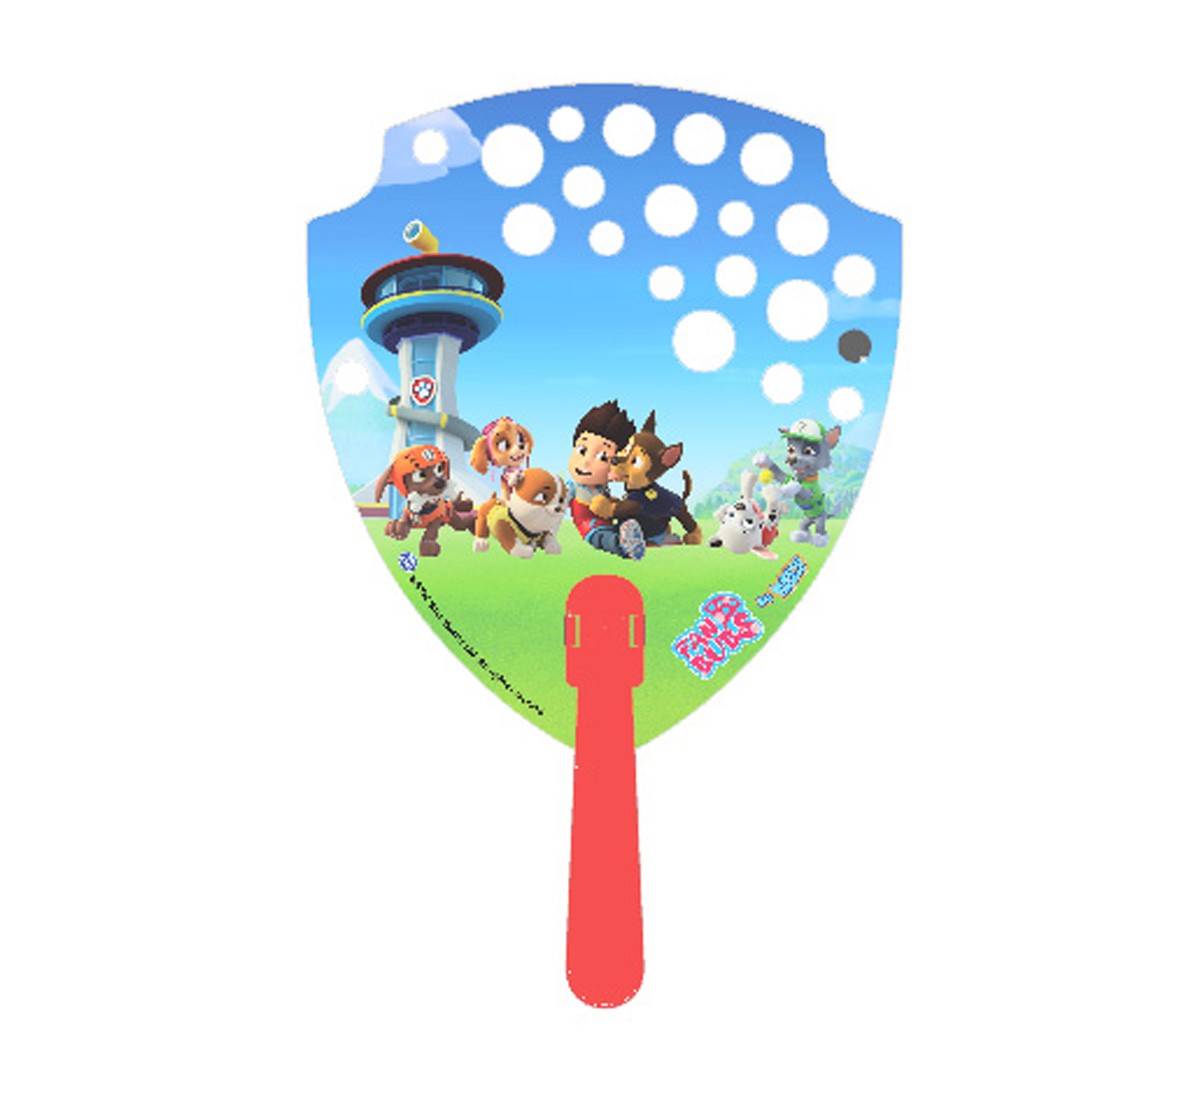 Bubble Magic Fan Bubs Paw Patrol, for The Kids 3 Years and Above